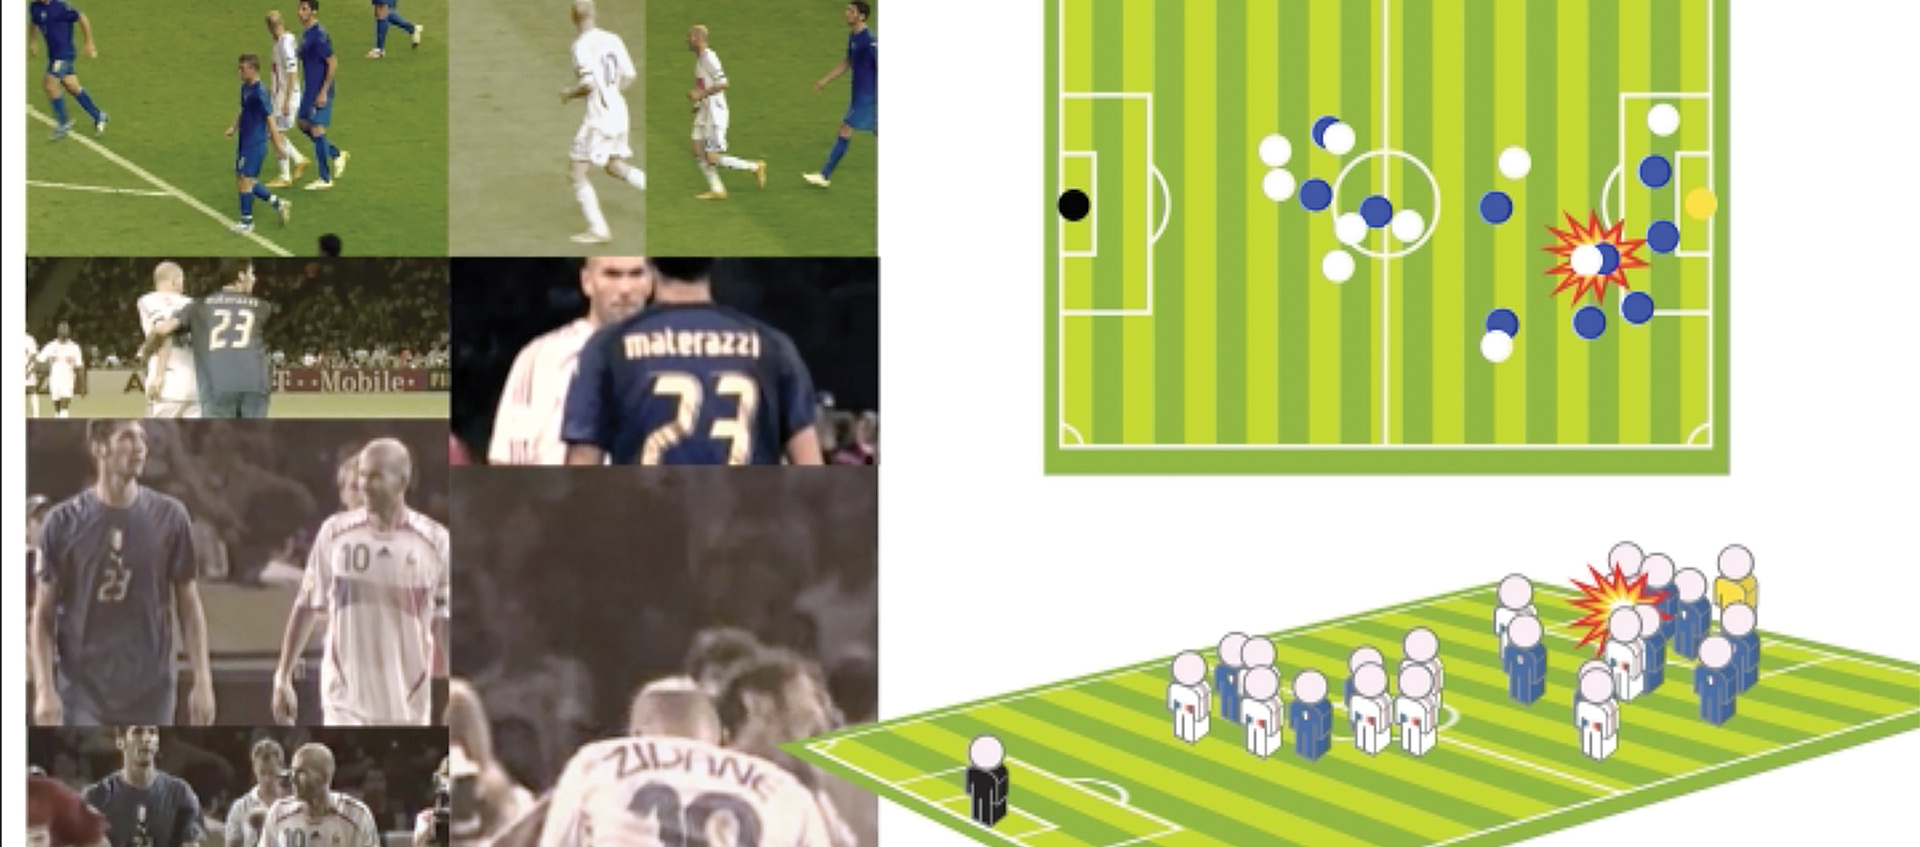 a collage of images showing soccer players and player formations